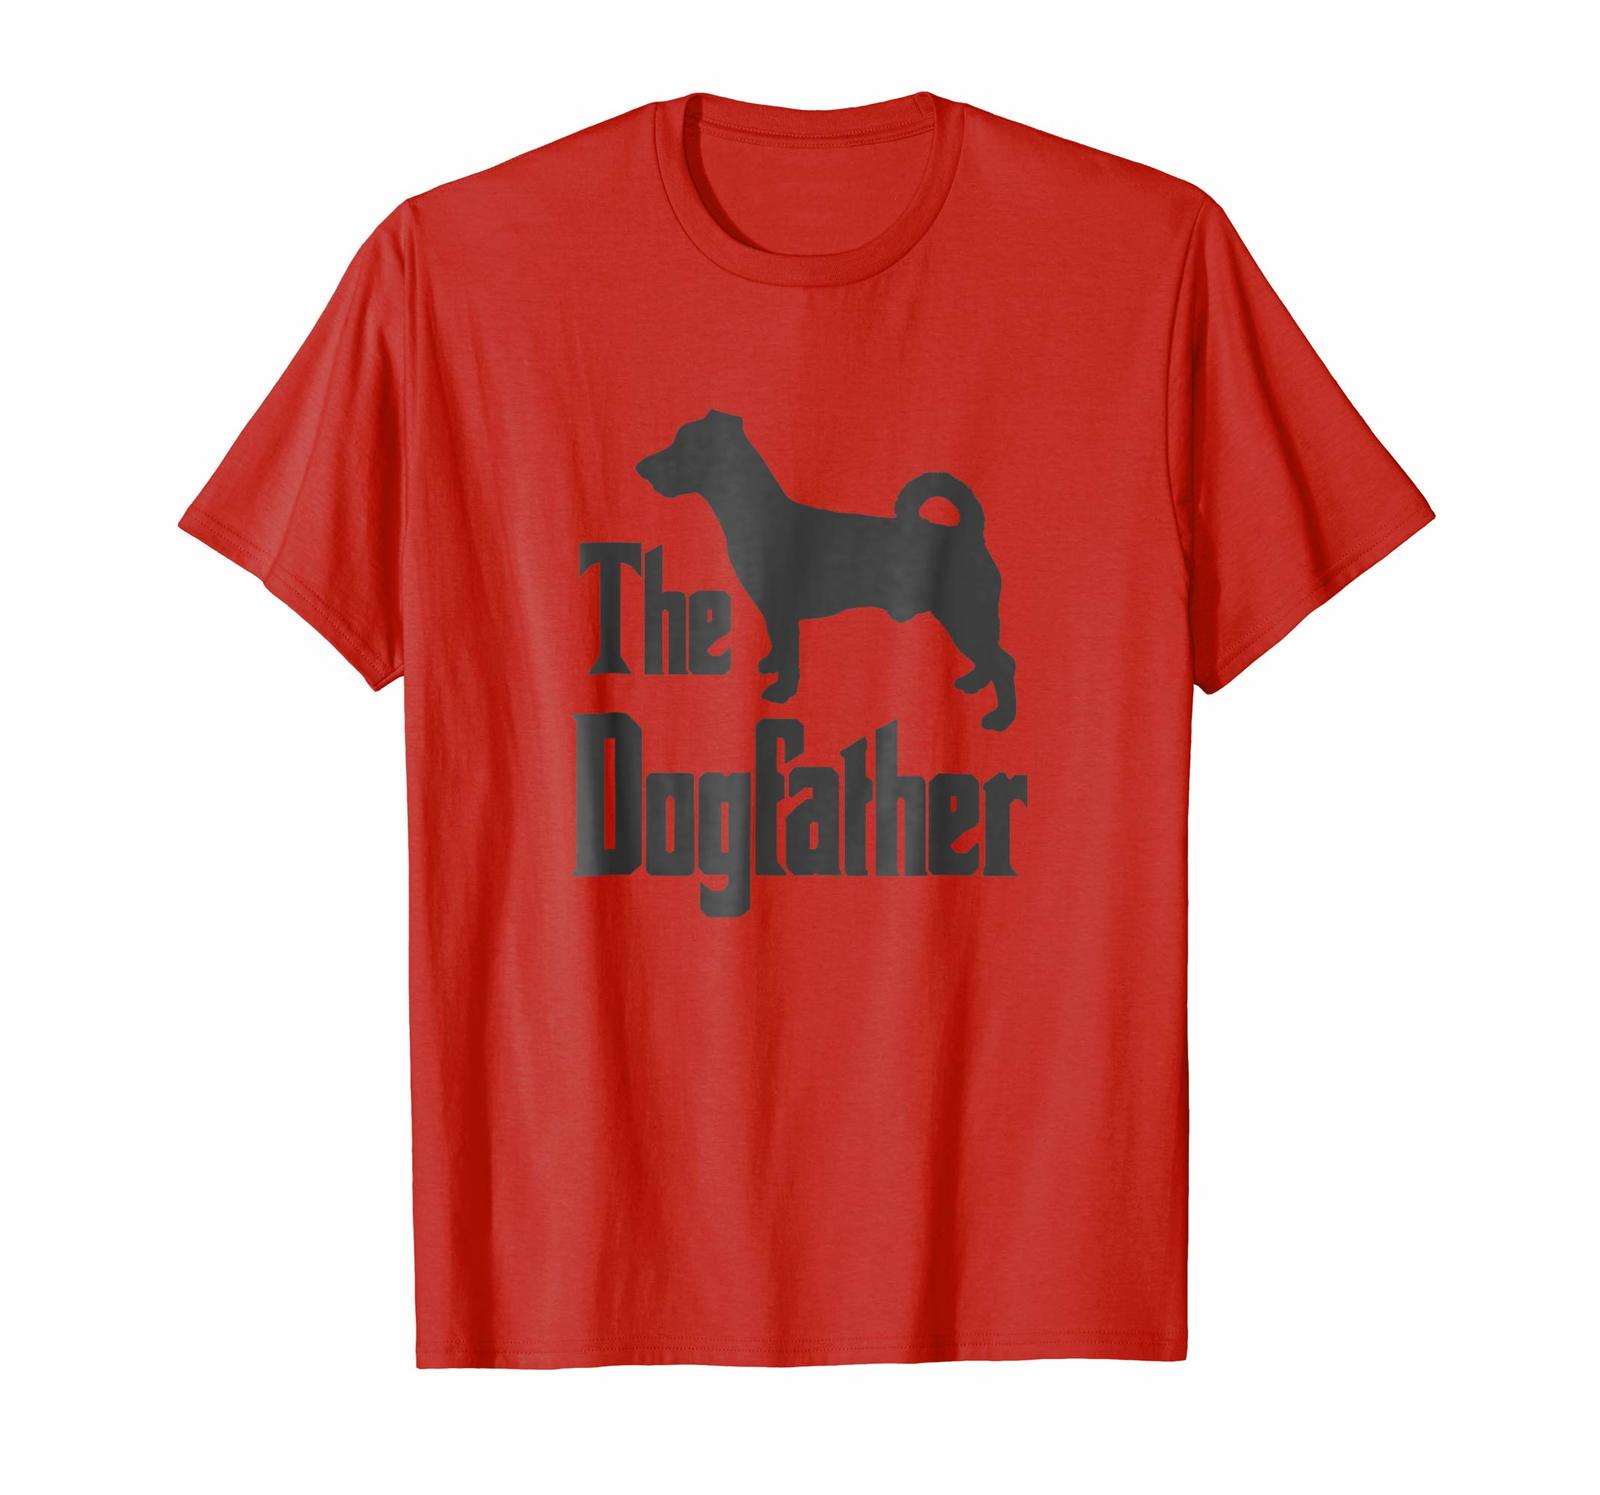 Dog Fashion - The Dogfather t-shirt Jack Russell silhouette funny dog Men